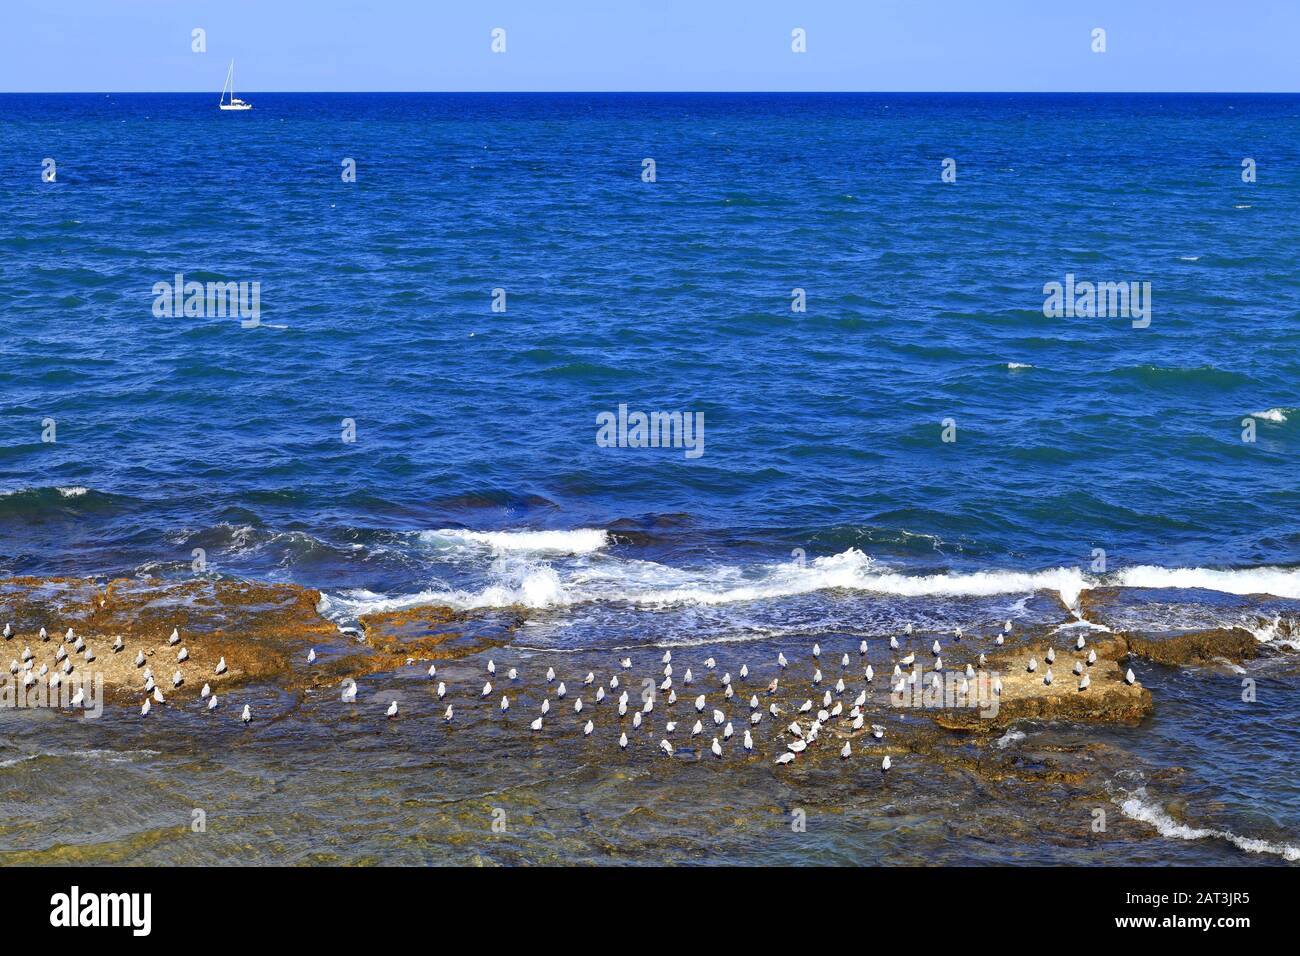 Adriatic Sea shoreline with sea birds gatherings at the water waves in Trani old town historic city center, in Apulia region of Italy. Stock Photo